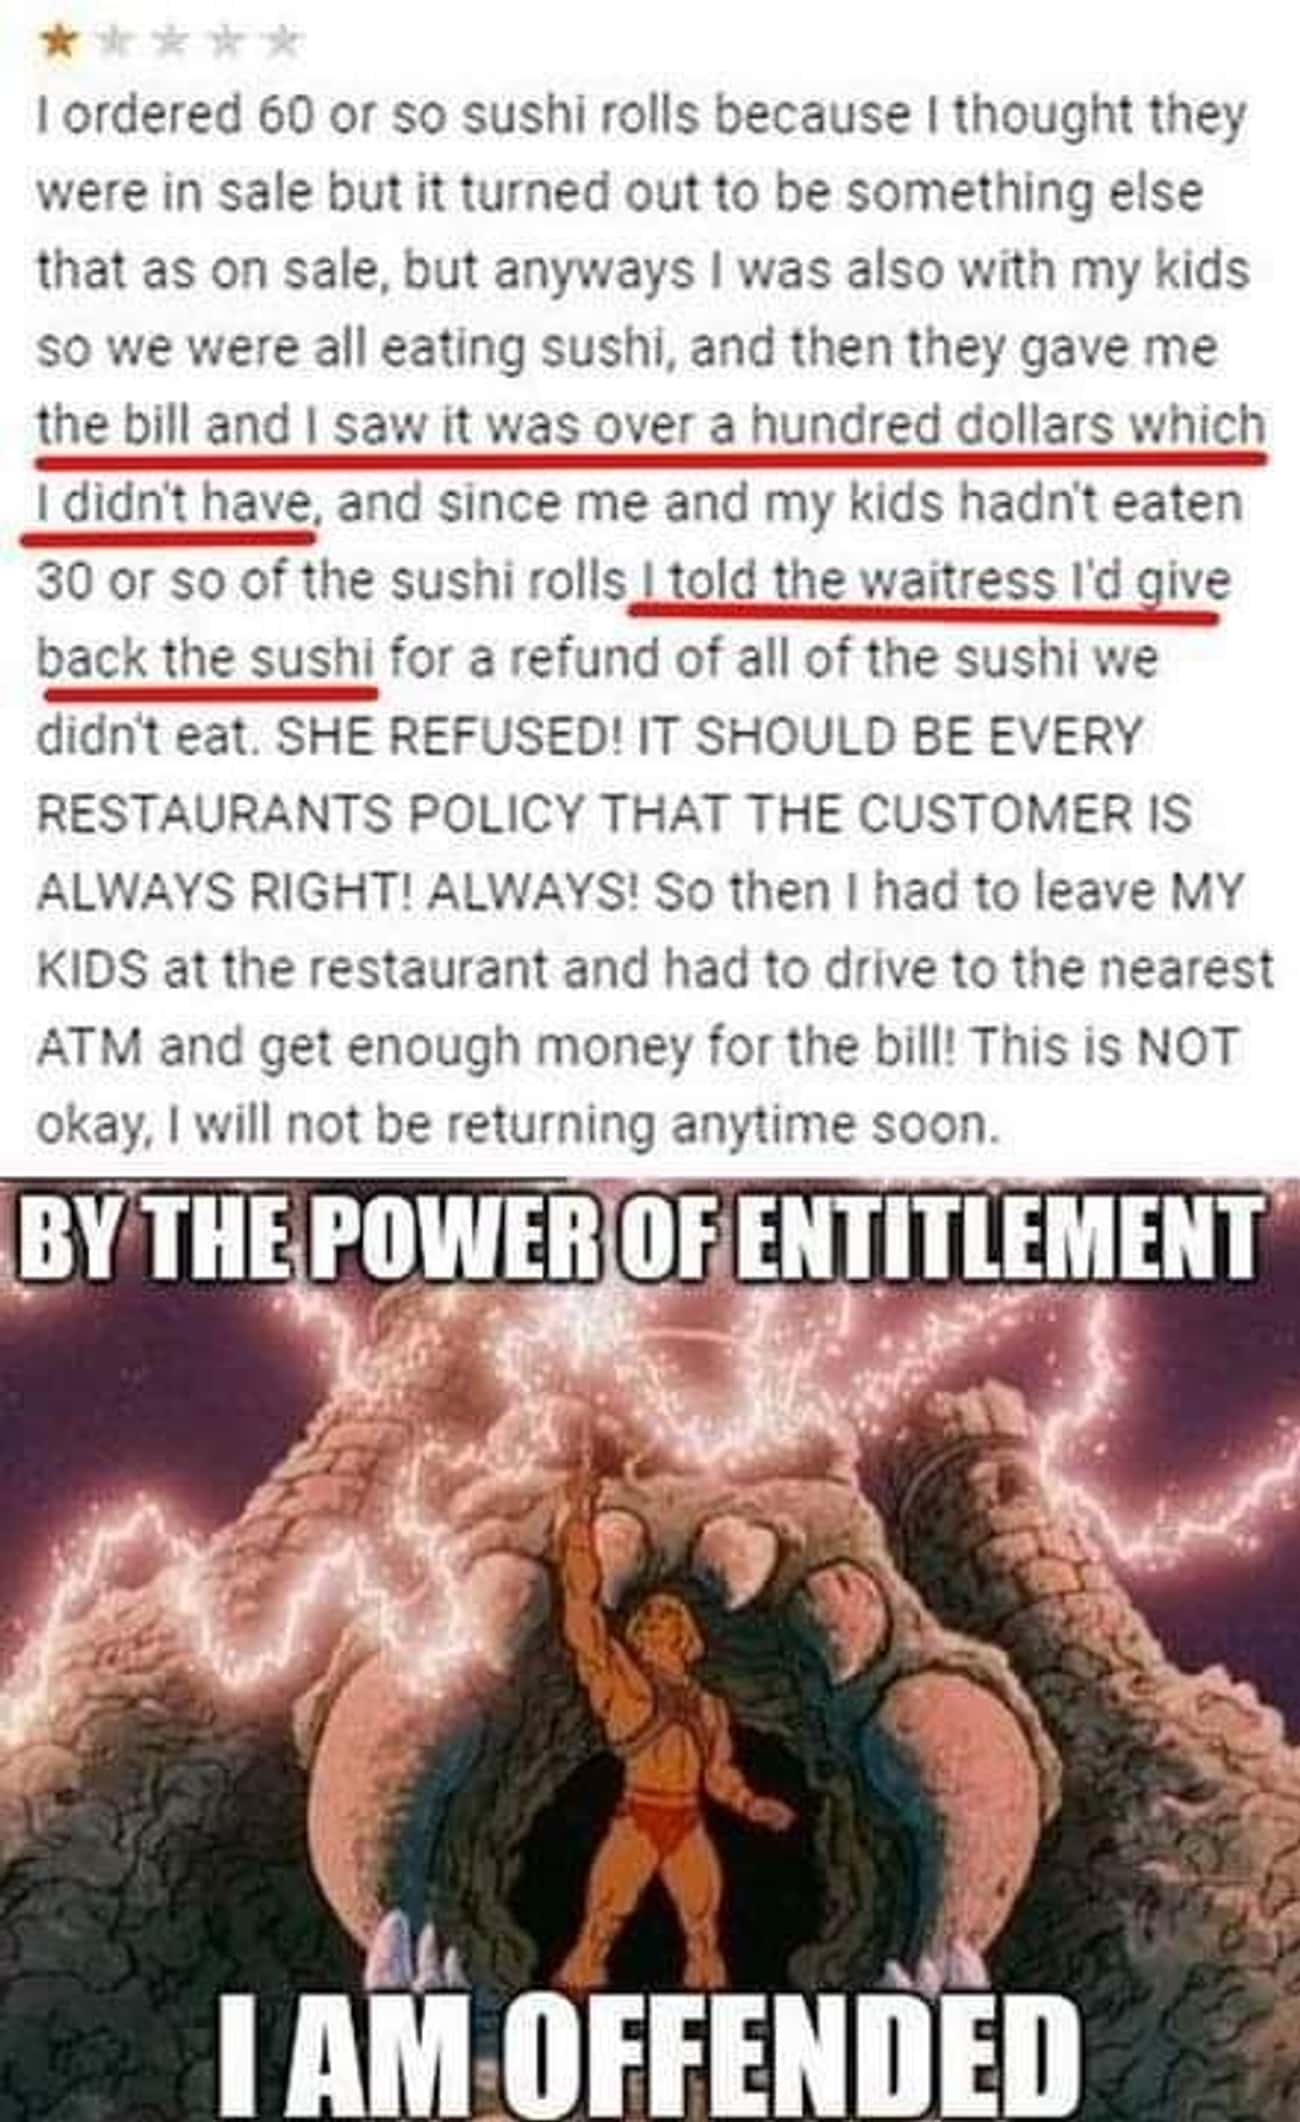 Entitled Customer Over-Orders And Then Complains When The Meal Can't Be Returned